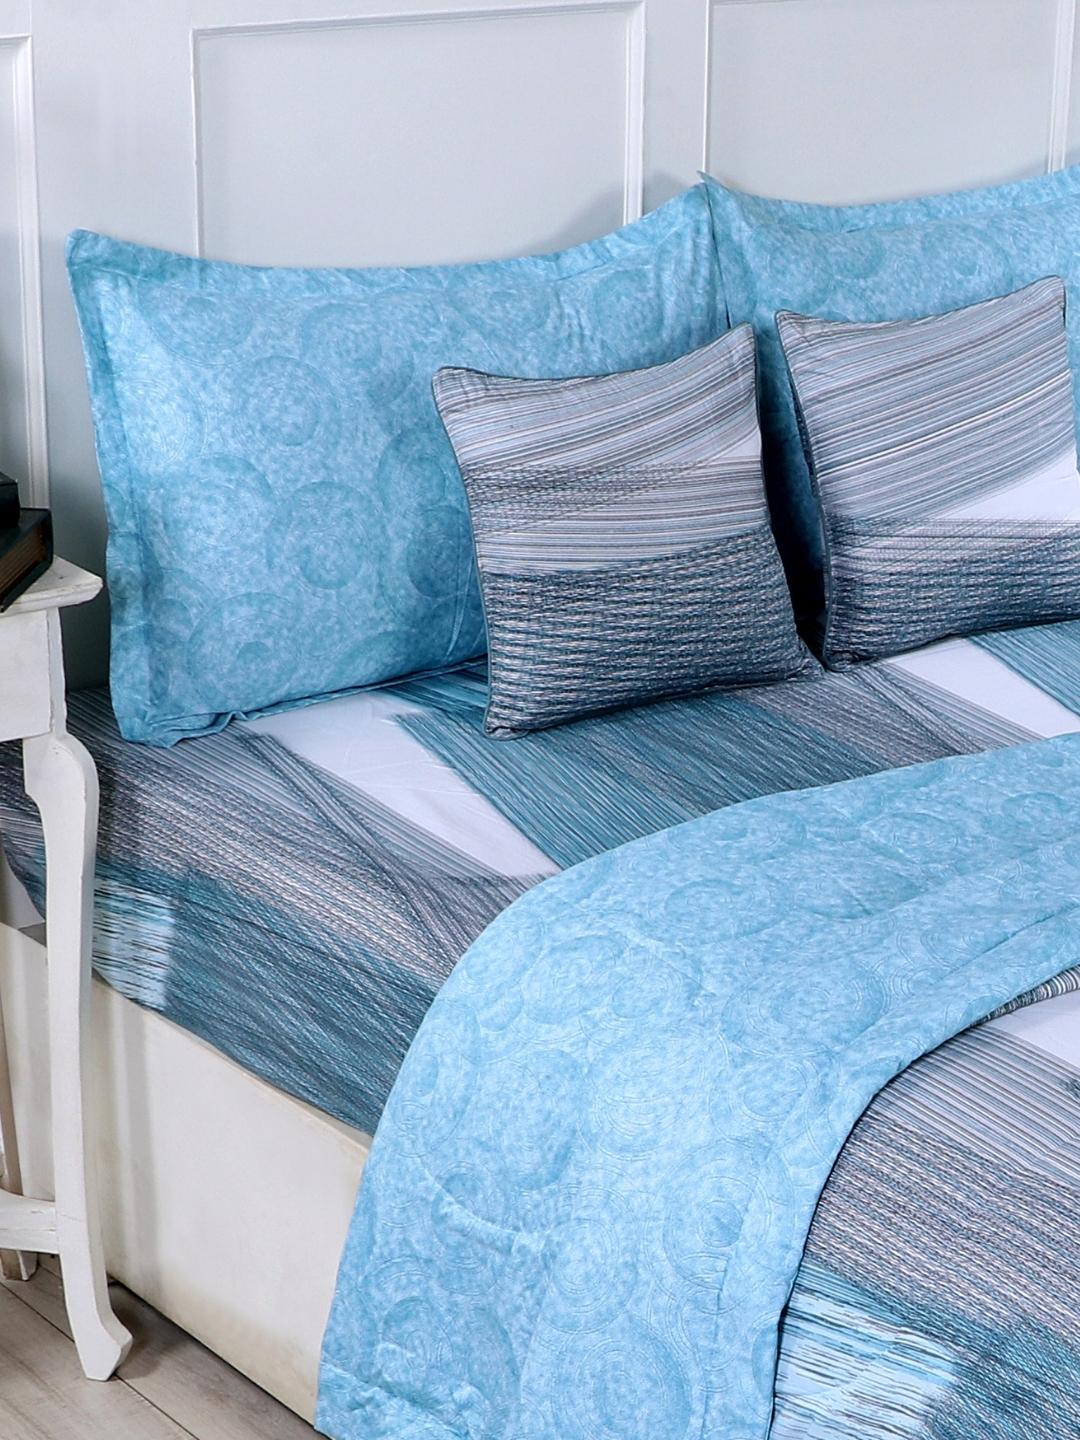 Cotton 6 Pcs Double Bed Bedding Set-Blue and Grey